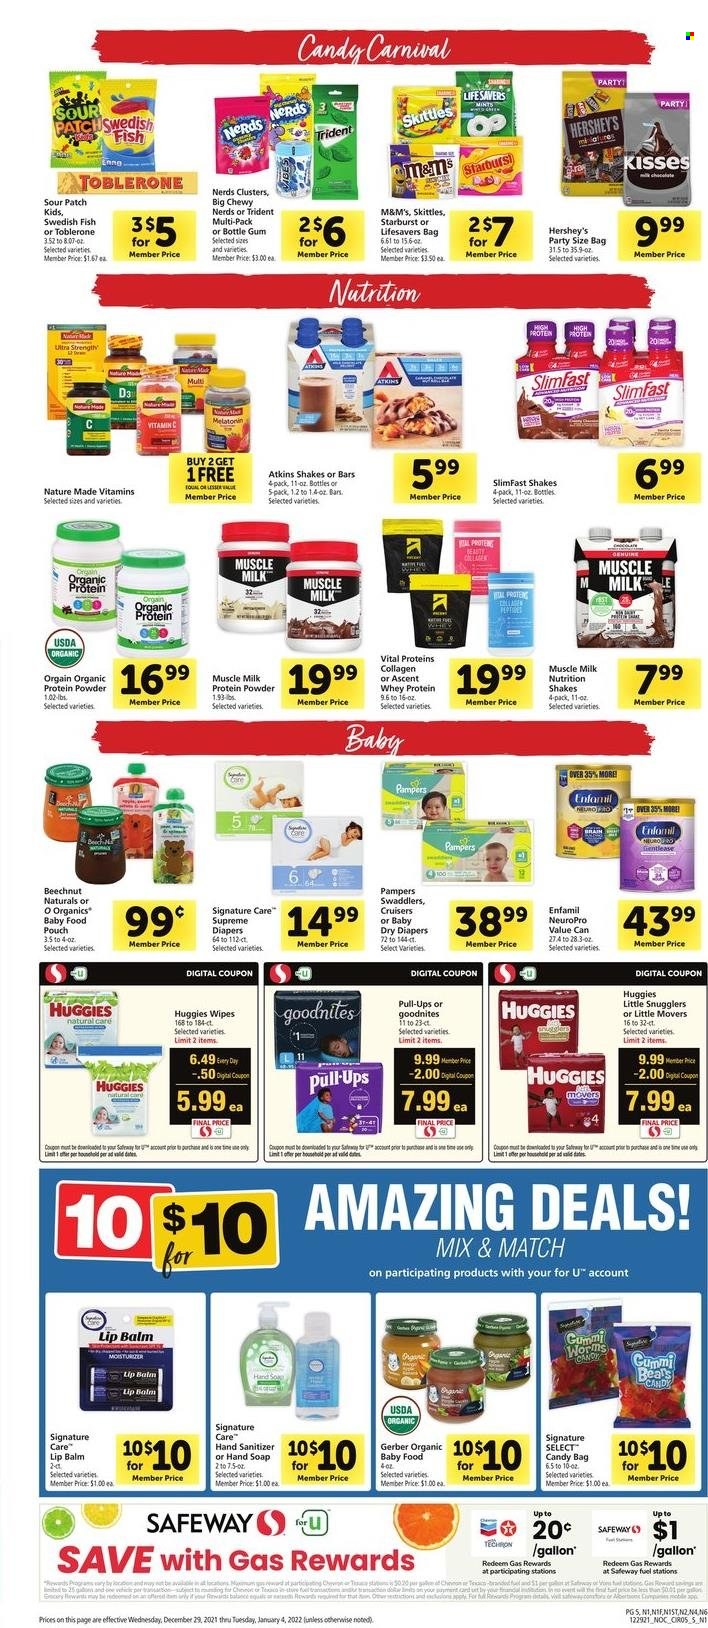 thumbnail - Safeway Flyer - 12/29/2021 - 01/04/2022 - Sales products - Slimfast, shake, muscle milk, Hershey's, M&M's, Toblerone, Skittles, Trident, Starburst, Sour Patch, Gerber, Enfamil, baby food pouch, wipes, hand soap, soap, lip balm, Melatonin, Nature Made, vitamin c, whey protein, Vital Proteins, vitamin D3, Huggies, hand sanitizer. Page 5.